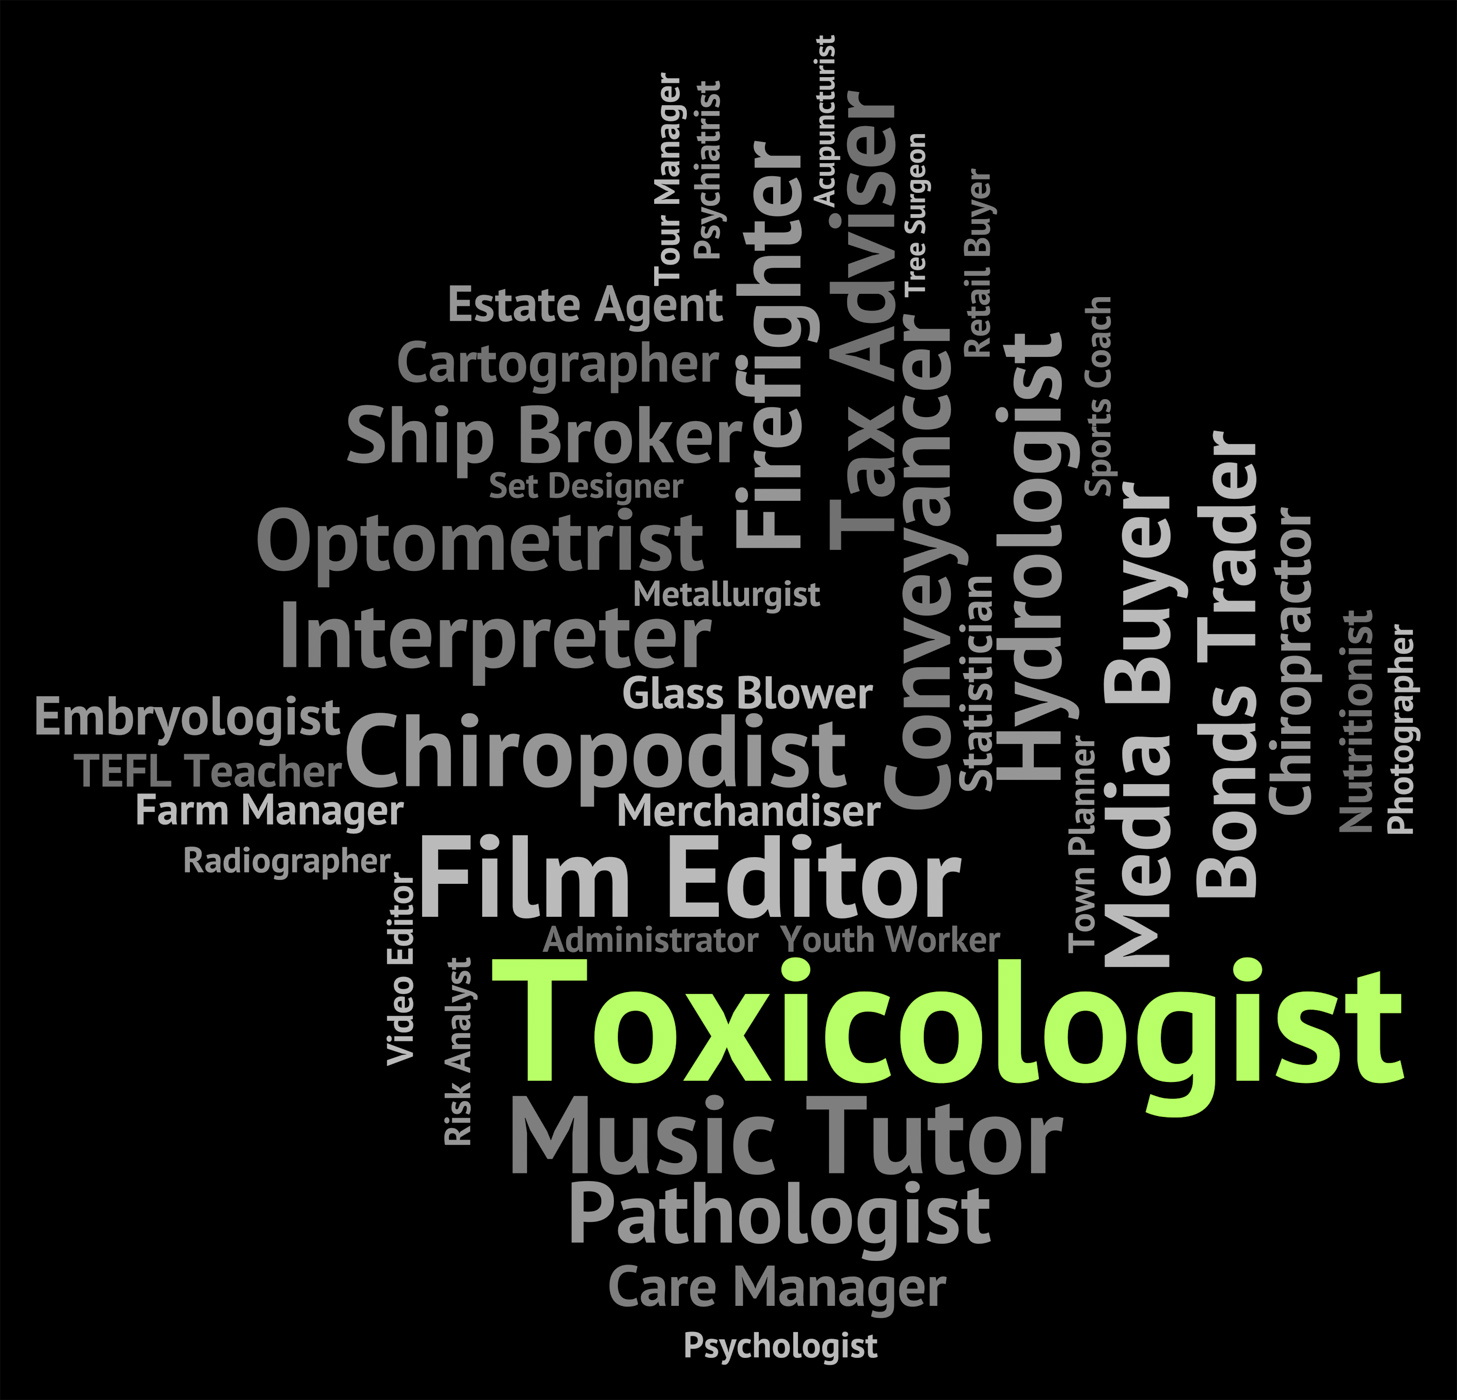 Toxicologist job indicates occupation recruitment and career photo